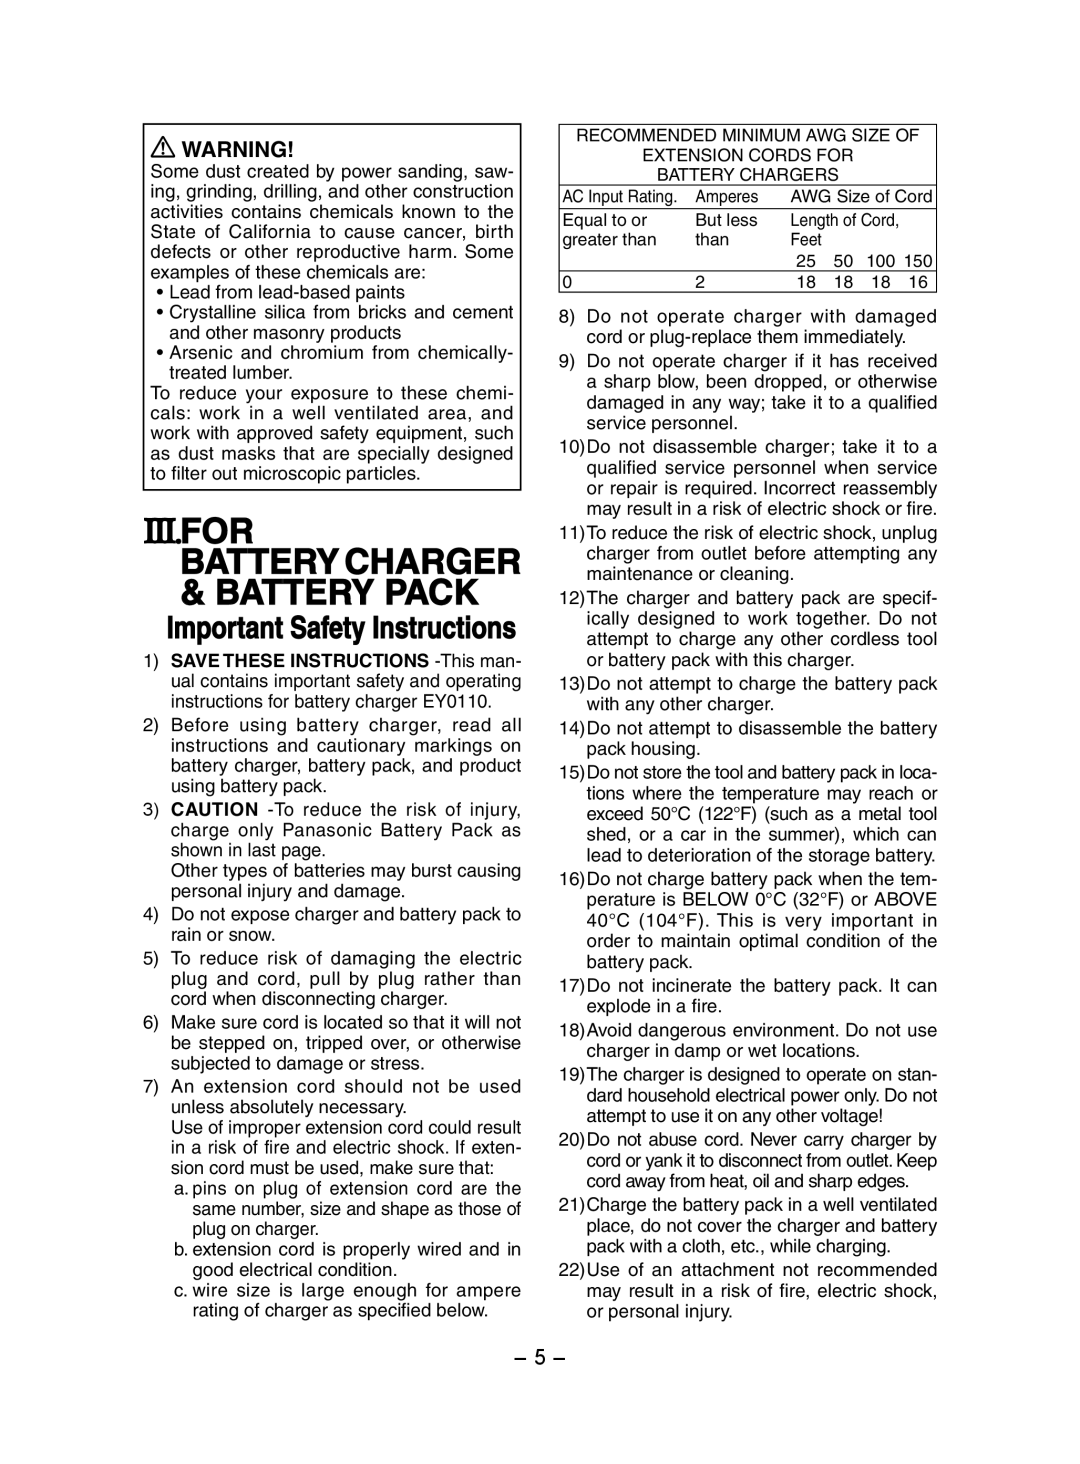 Panasonic EY7202 operating instructions Battery Charger & Battery Pack, Important Safety Instructions, Iii.For 